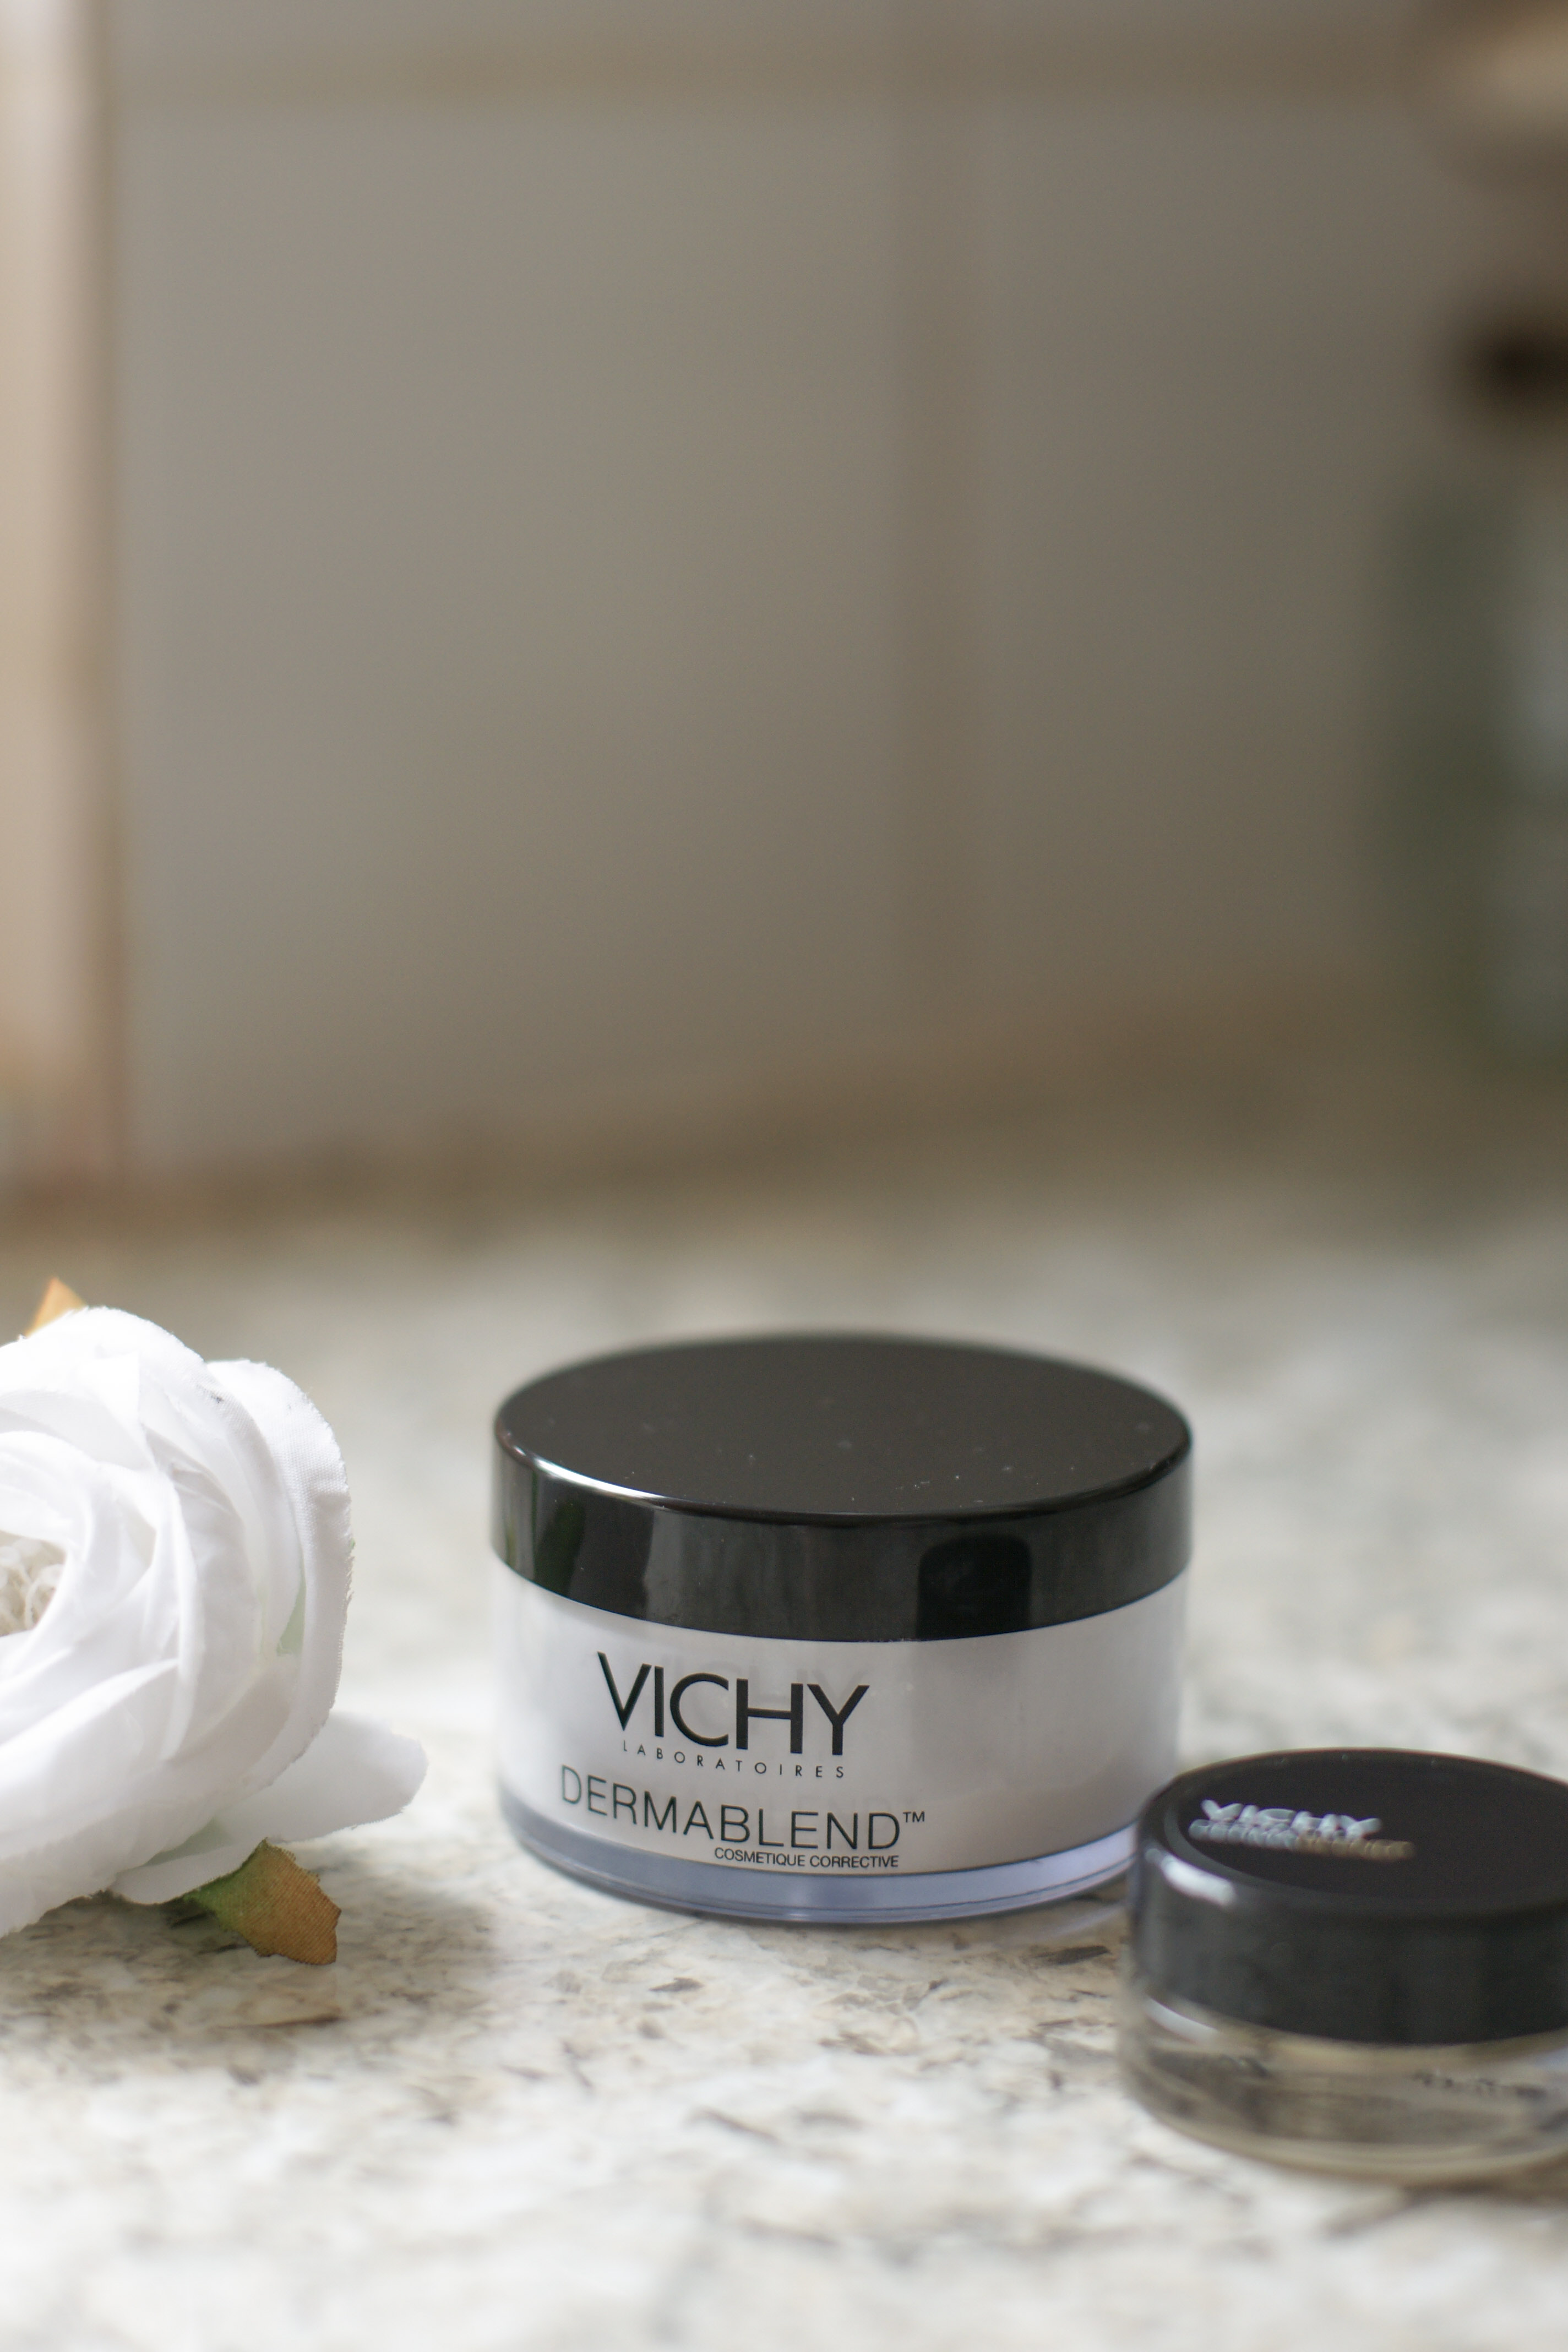 Vichy Dermablend Setting Powder and Corrector